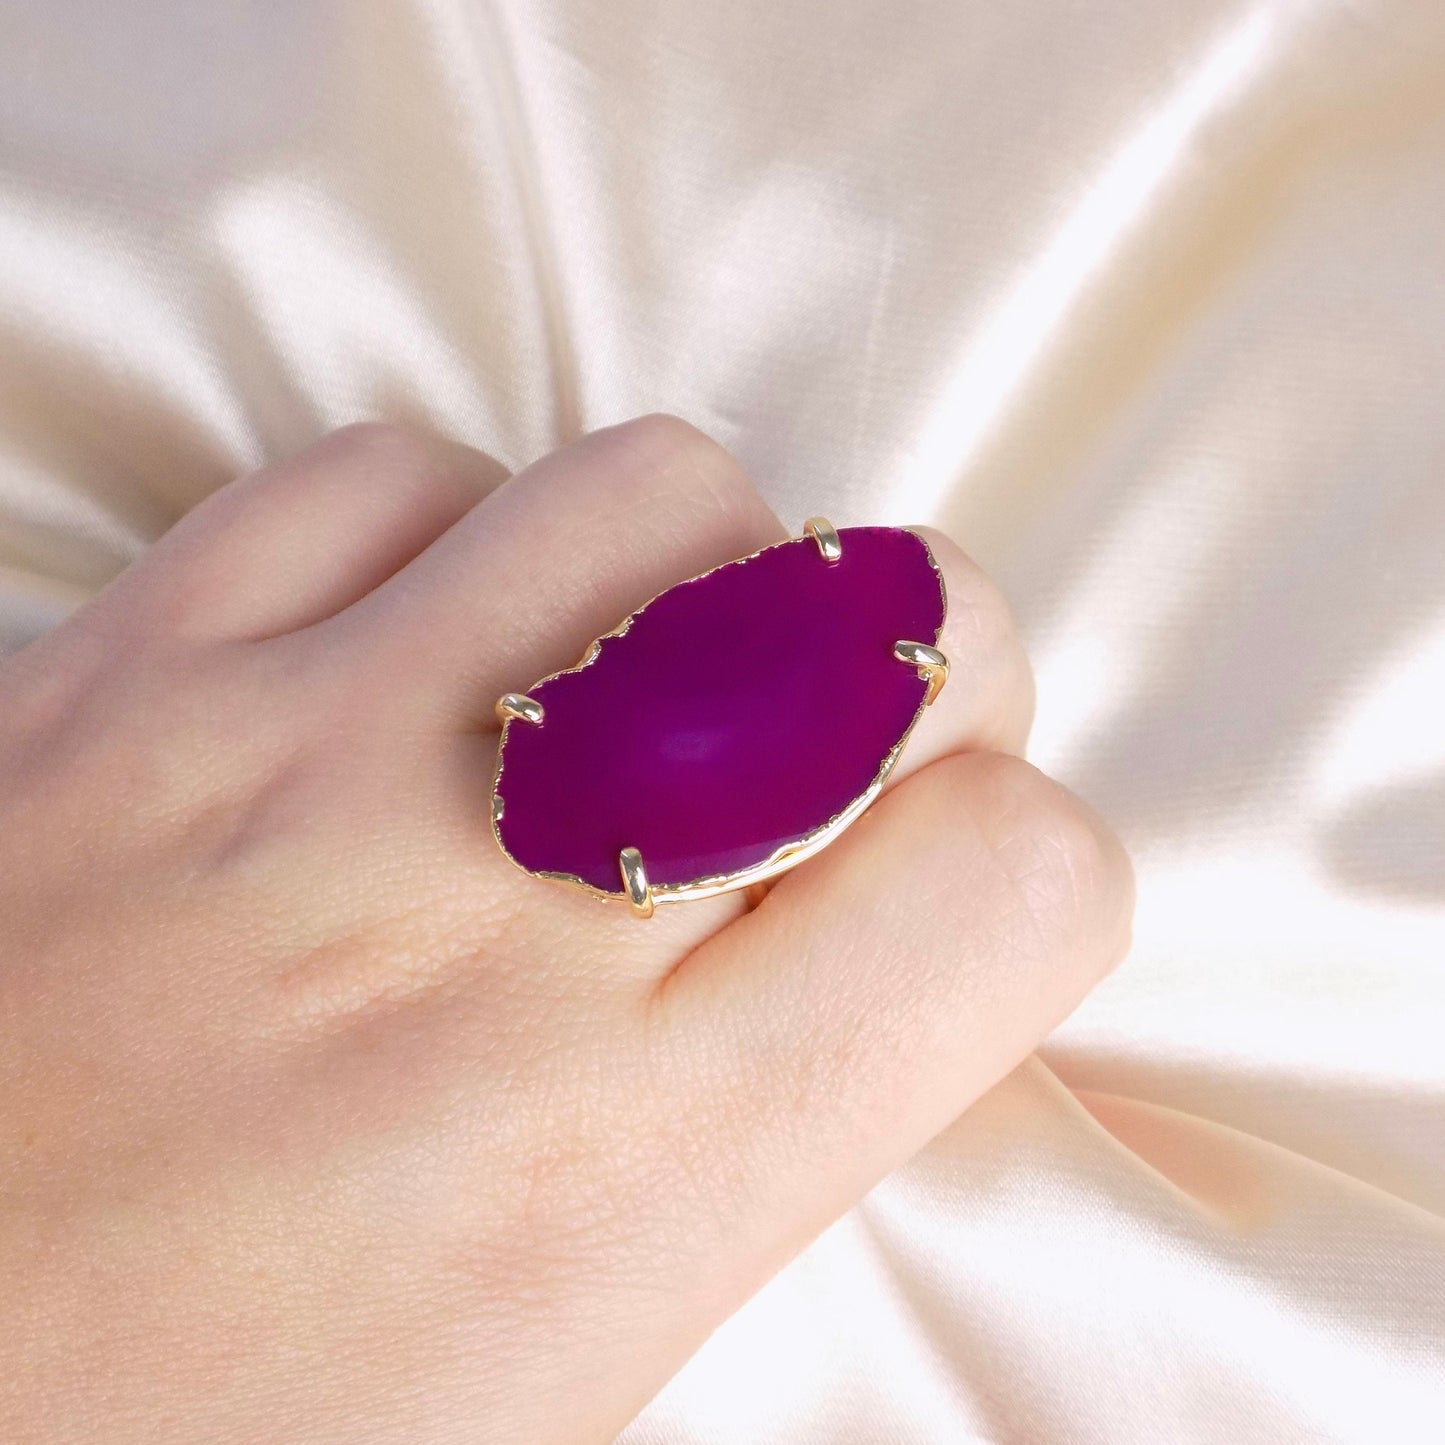 Boho Statement Ring, Hot Pink Agate Ring Gold Plated Adjustable, Geode Slice Ring, Unique Crystal, Christmas Gifts Her, G15-110